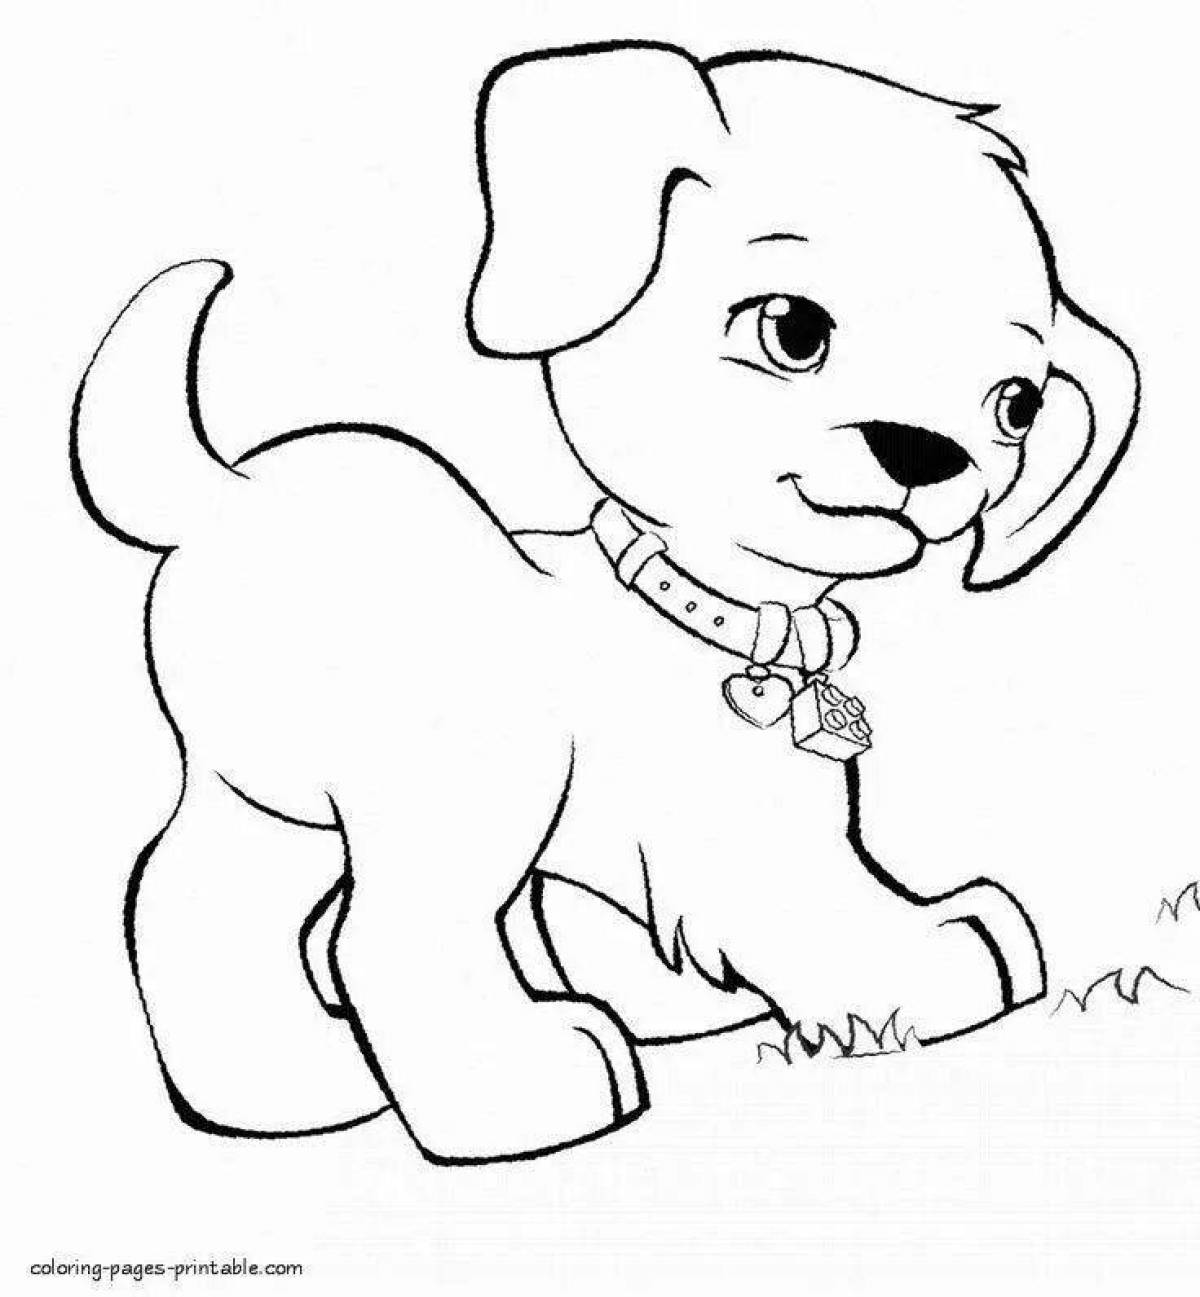 Great coloring book for girls dogs cats